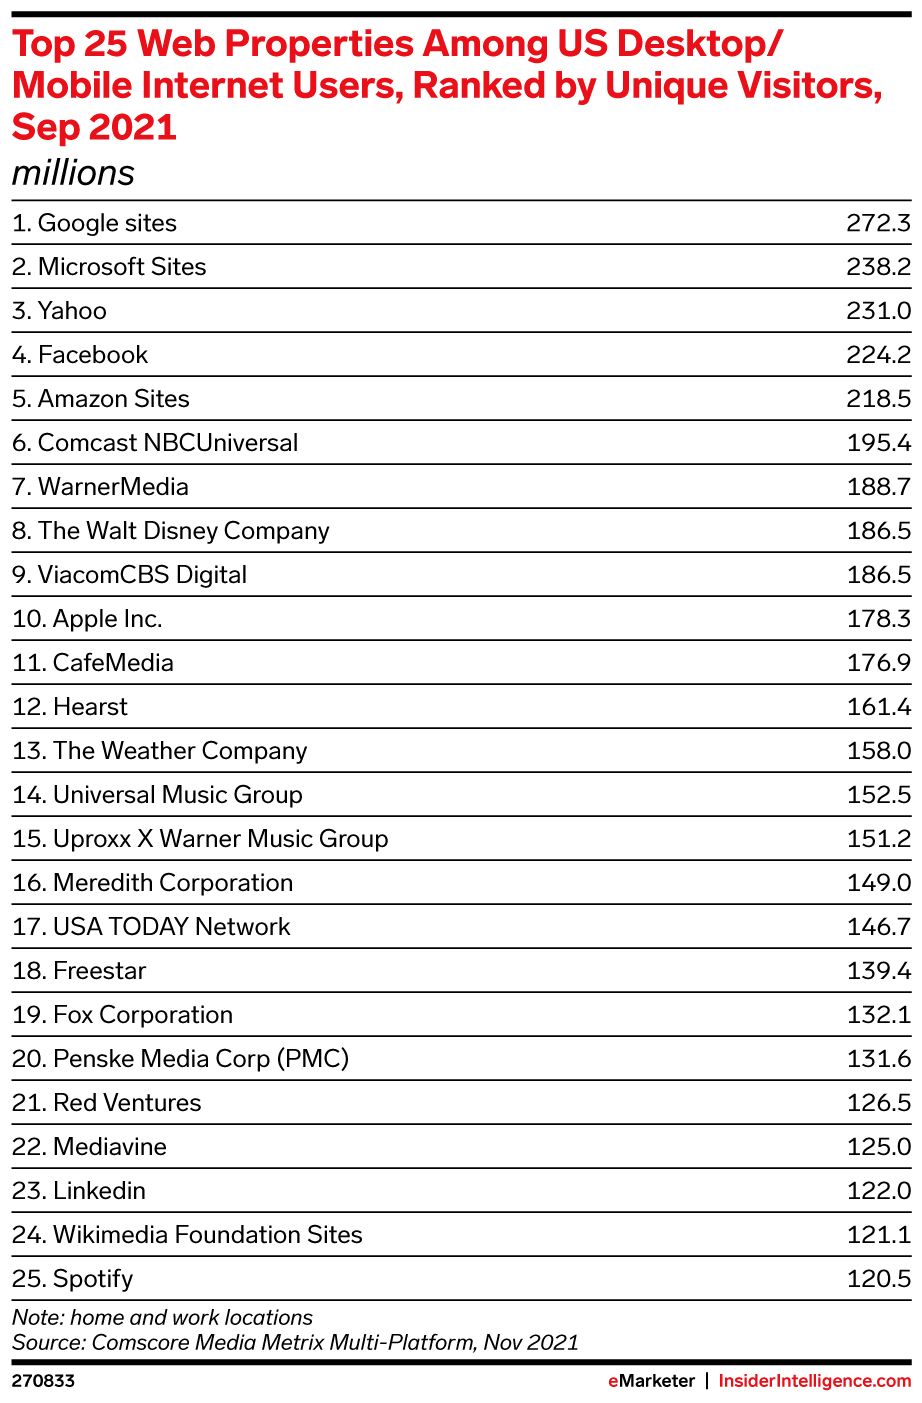 Top 25 Web Properties Among US Desktop/Mobile Internet Users, Ranked by Unique Visitors, Sep 2021 (millions)